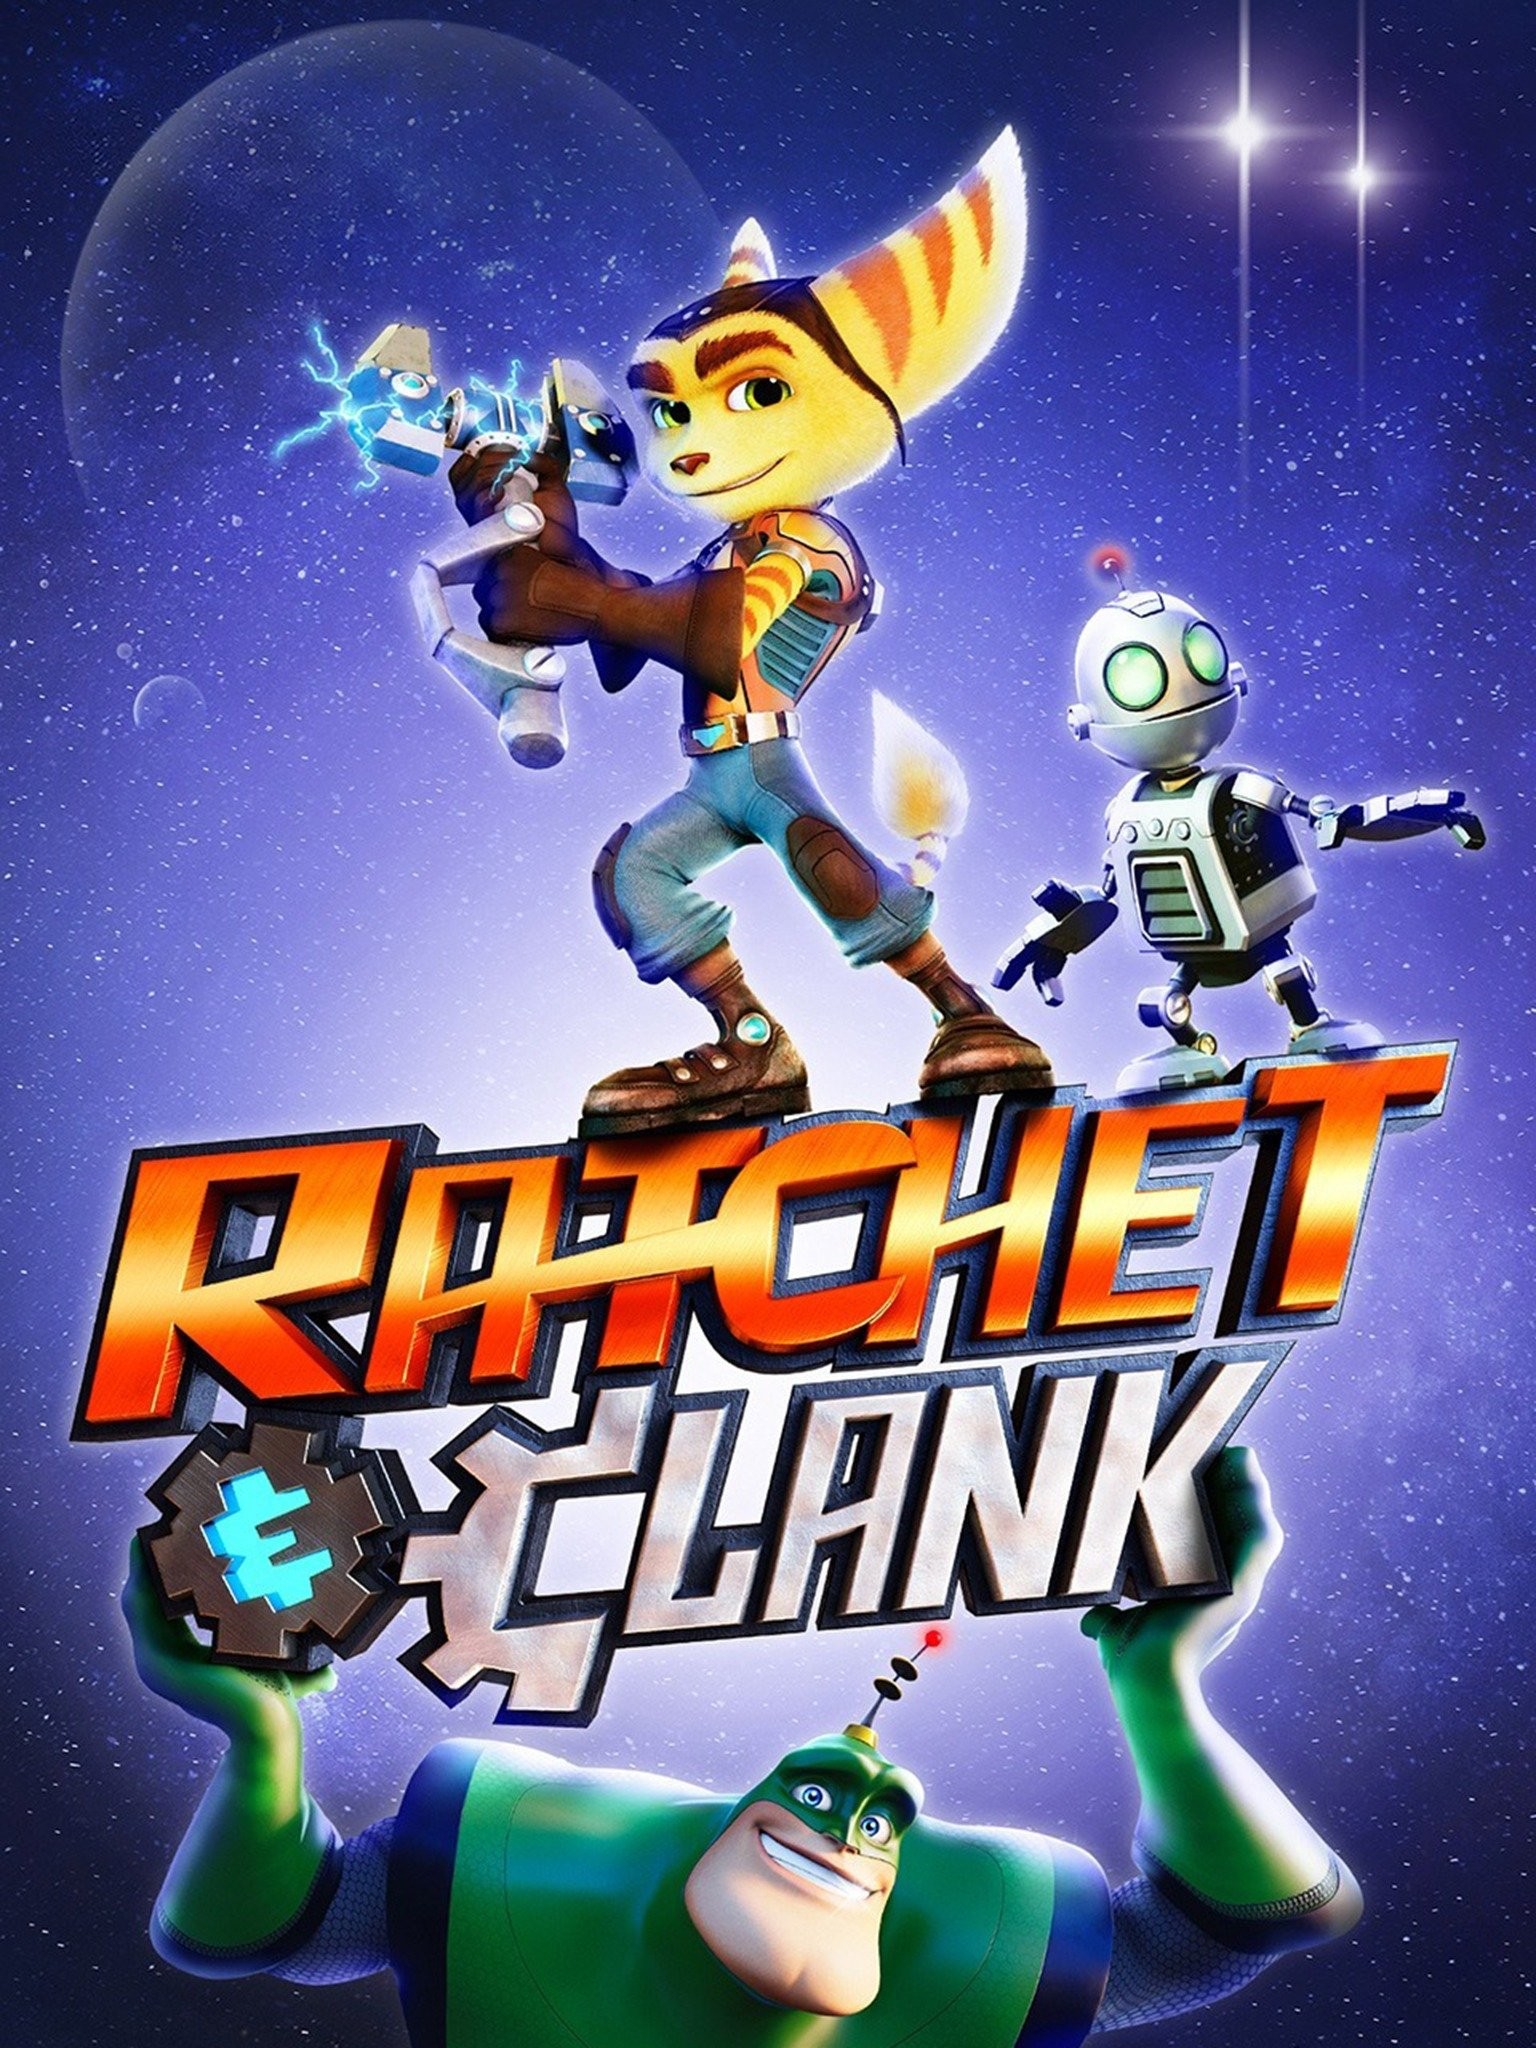 Ratchet & Clank PS4 game and movie both pushed back to 2016